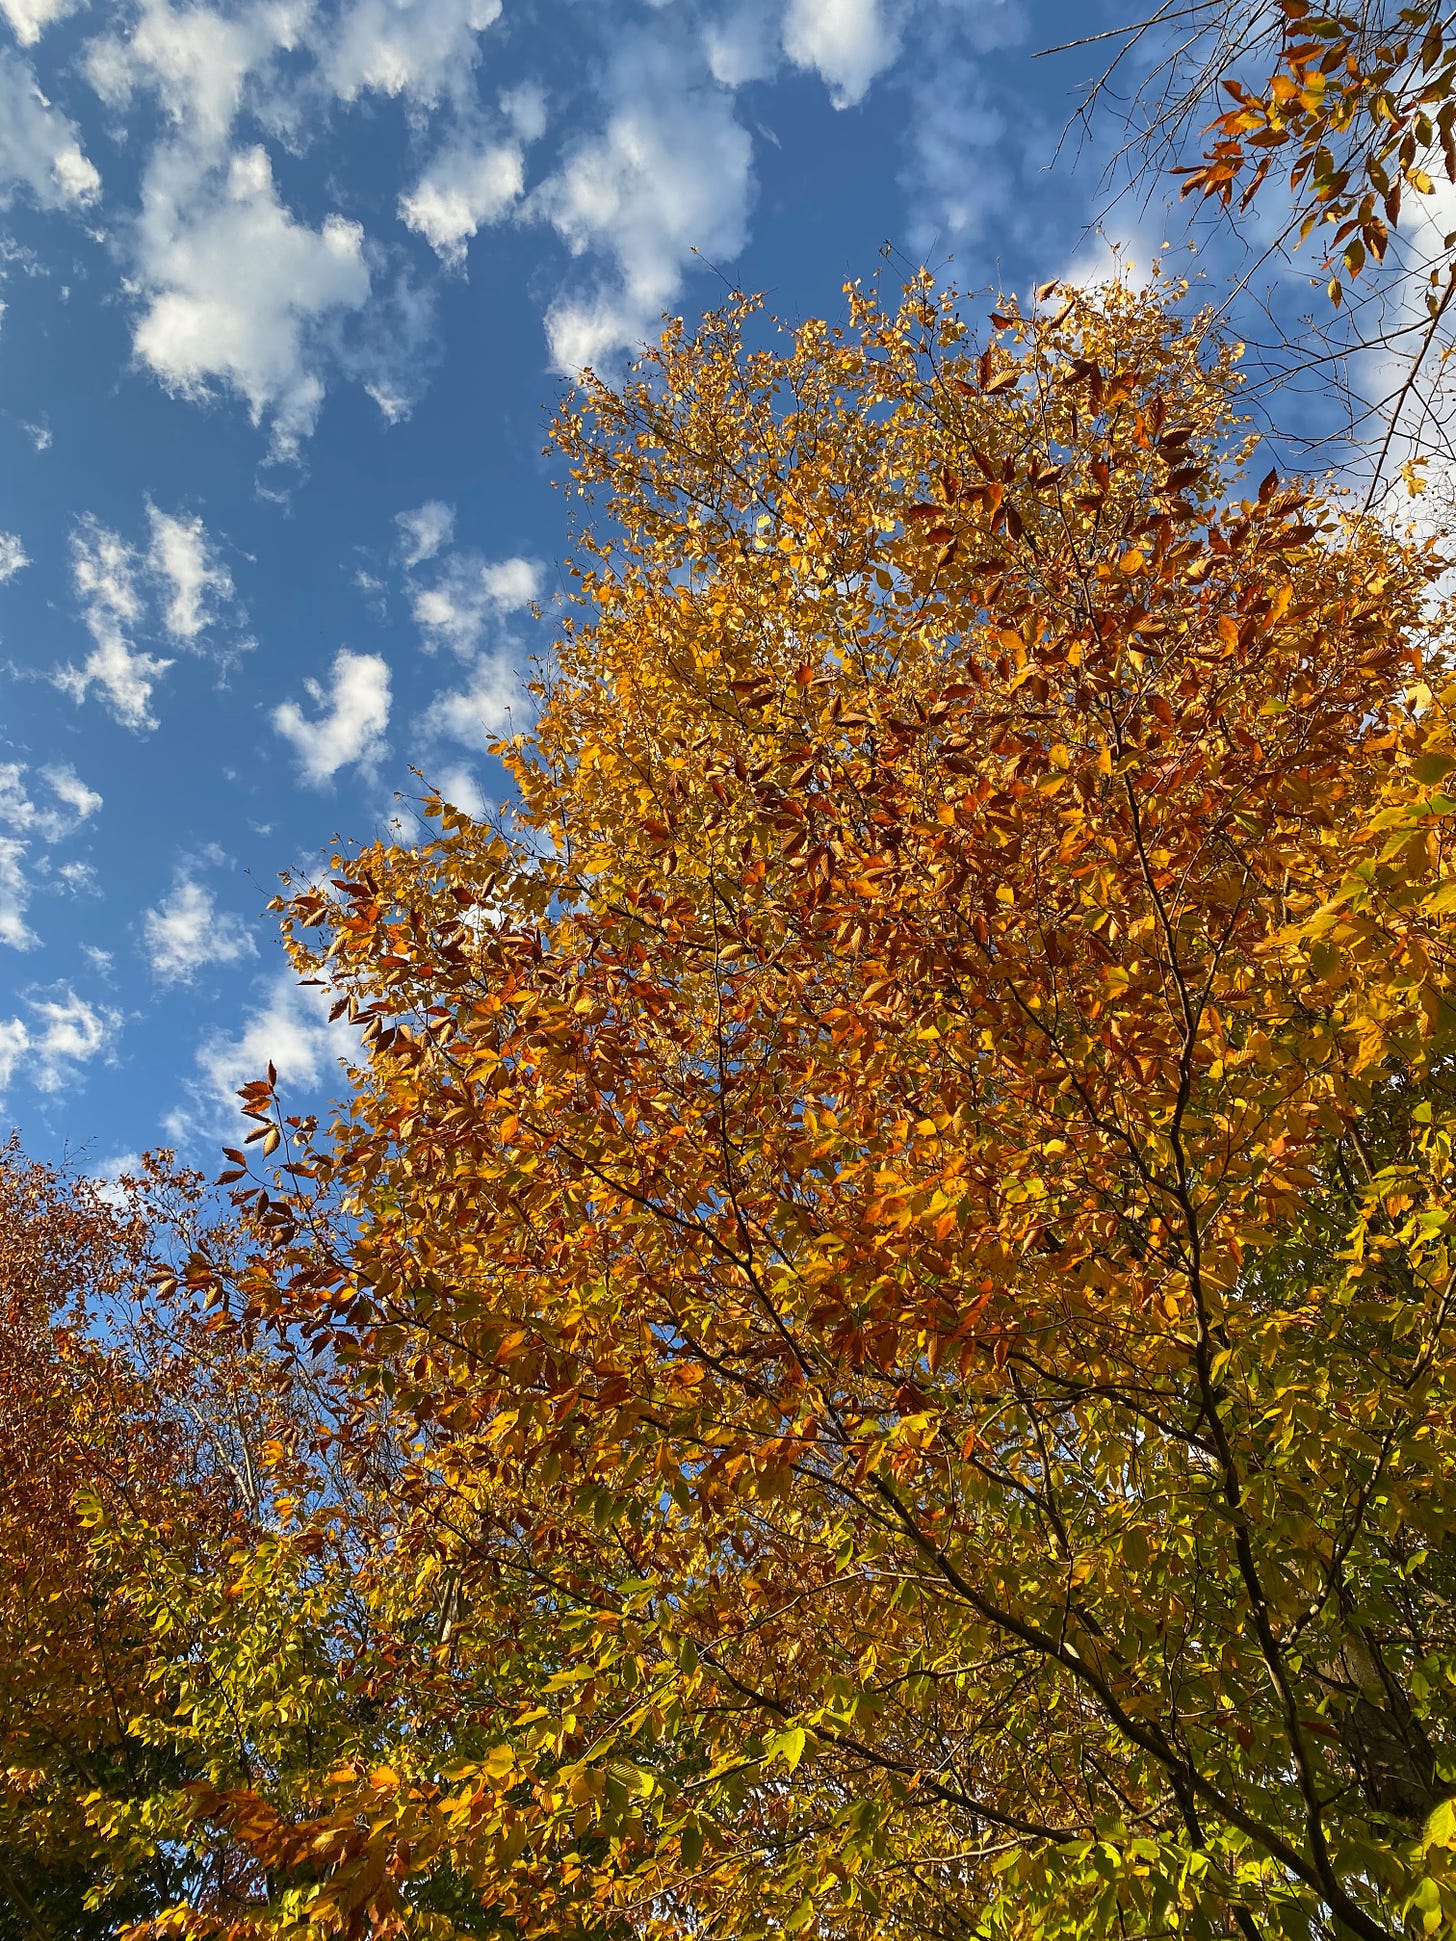 A bright golden tree against a deep blue sky dotted with white clouds.